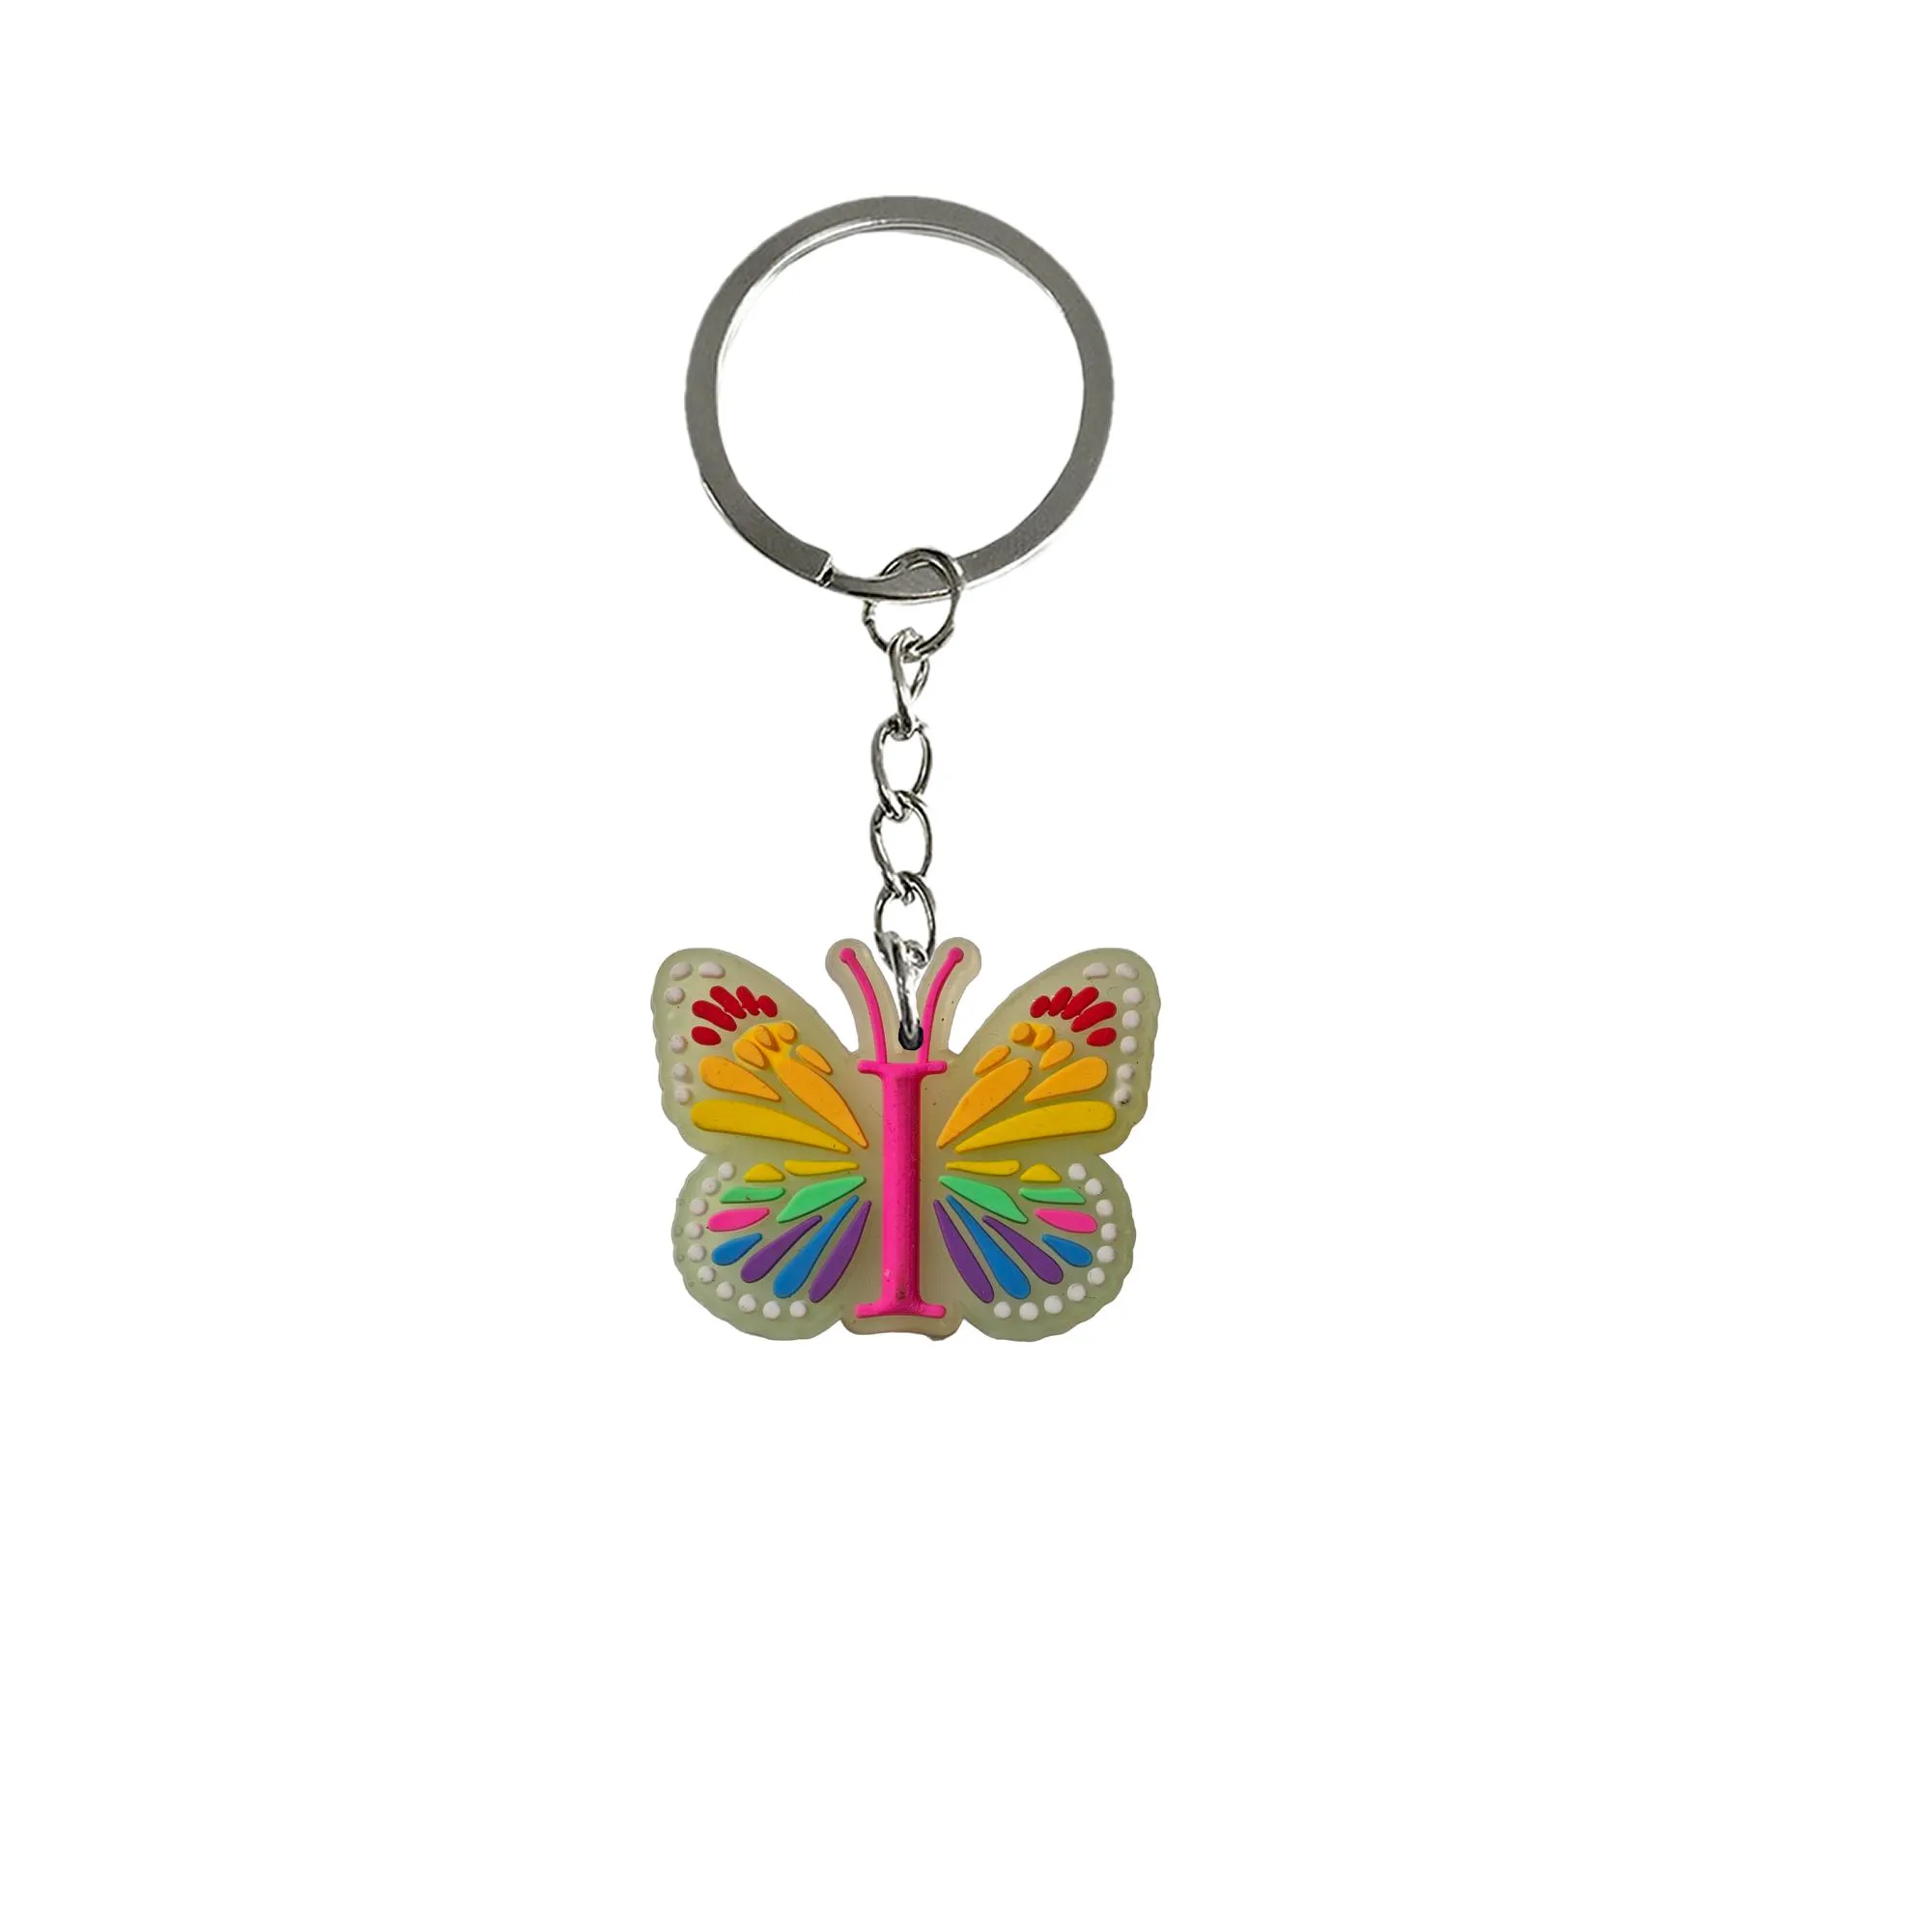 fluorescent letter butterfly keychain keyring for classroom school day birthday party supplies gift bags backpack keychains girls suitable schoolbag pendants accessories kids favors couple key chains women pendant